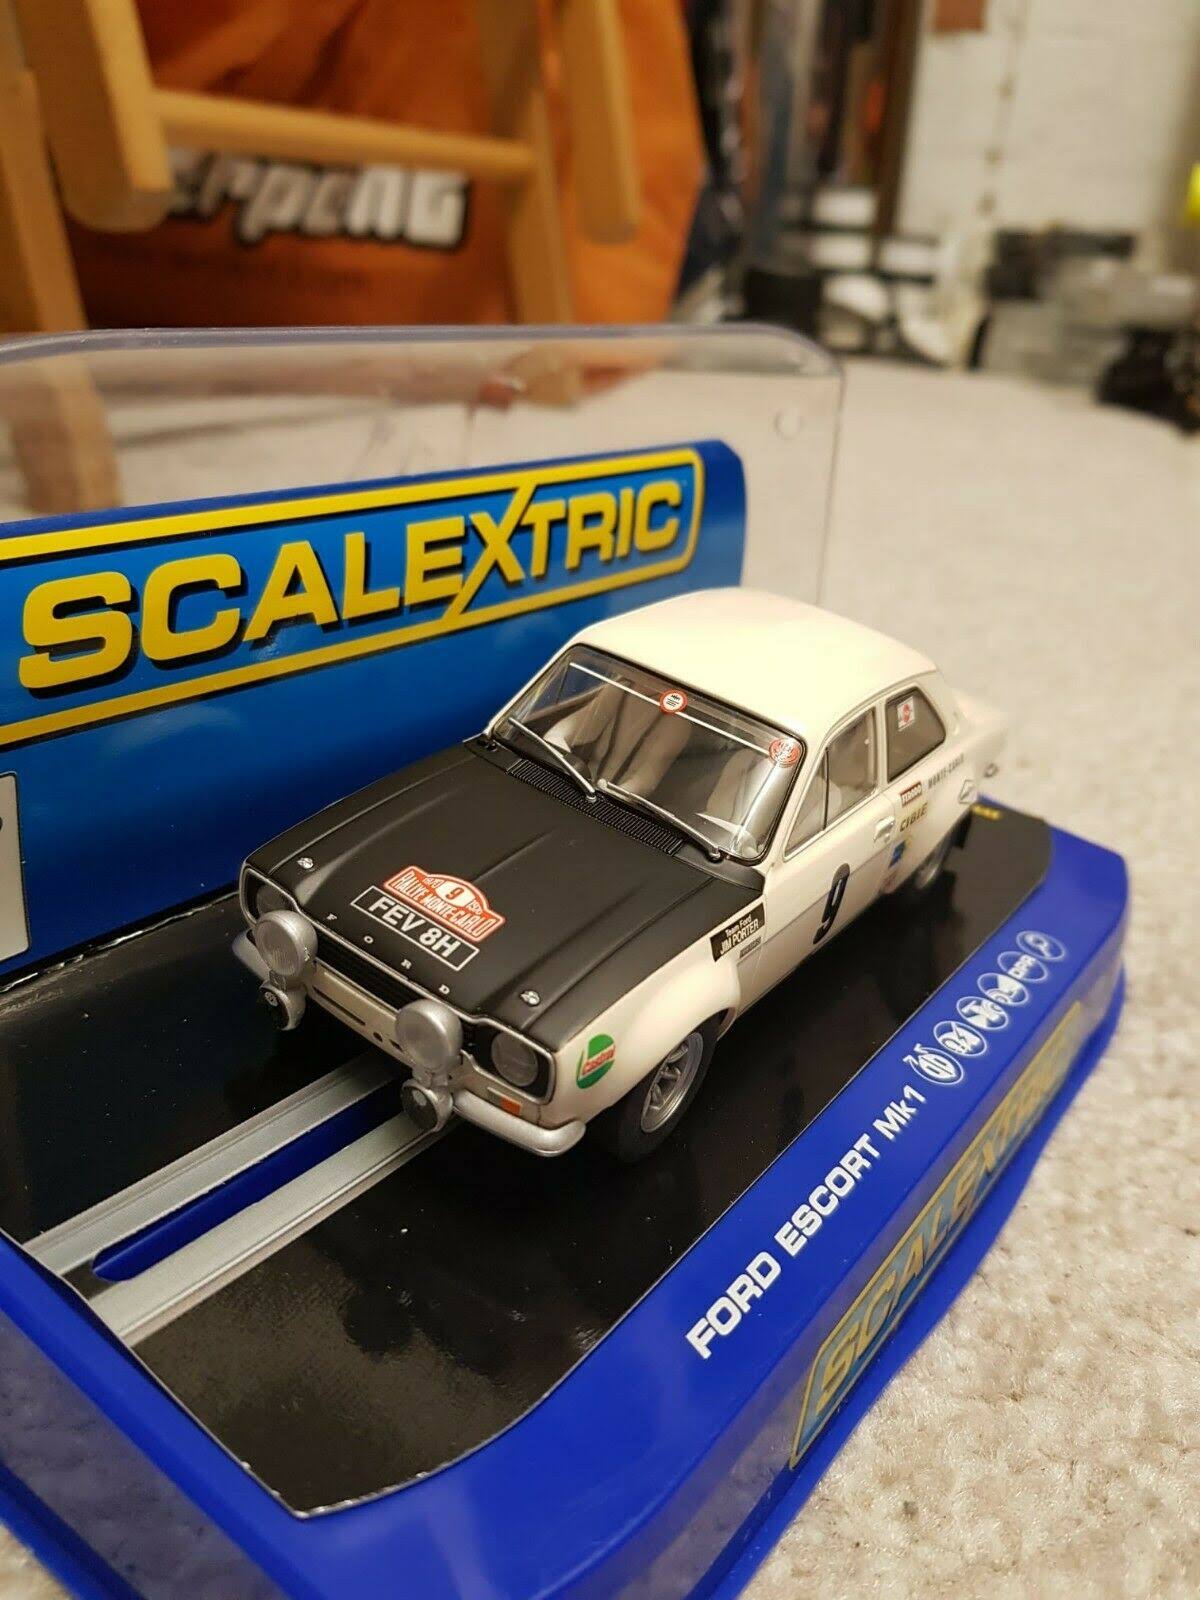 Scalextric '70 RS1600 Monte Carlo Ford Escort Slot Car (1:32 Scale)